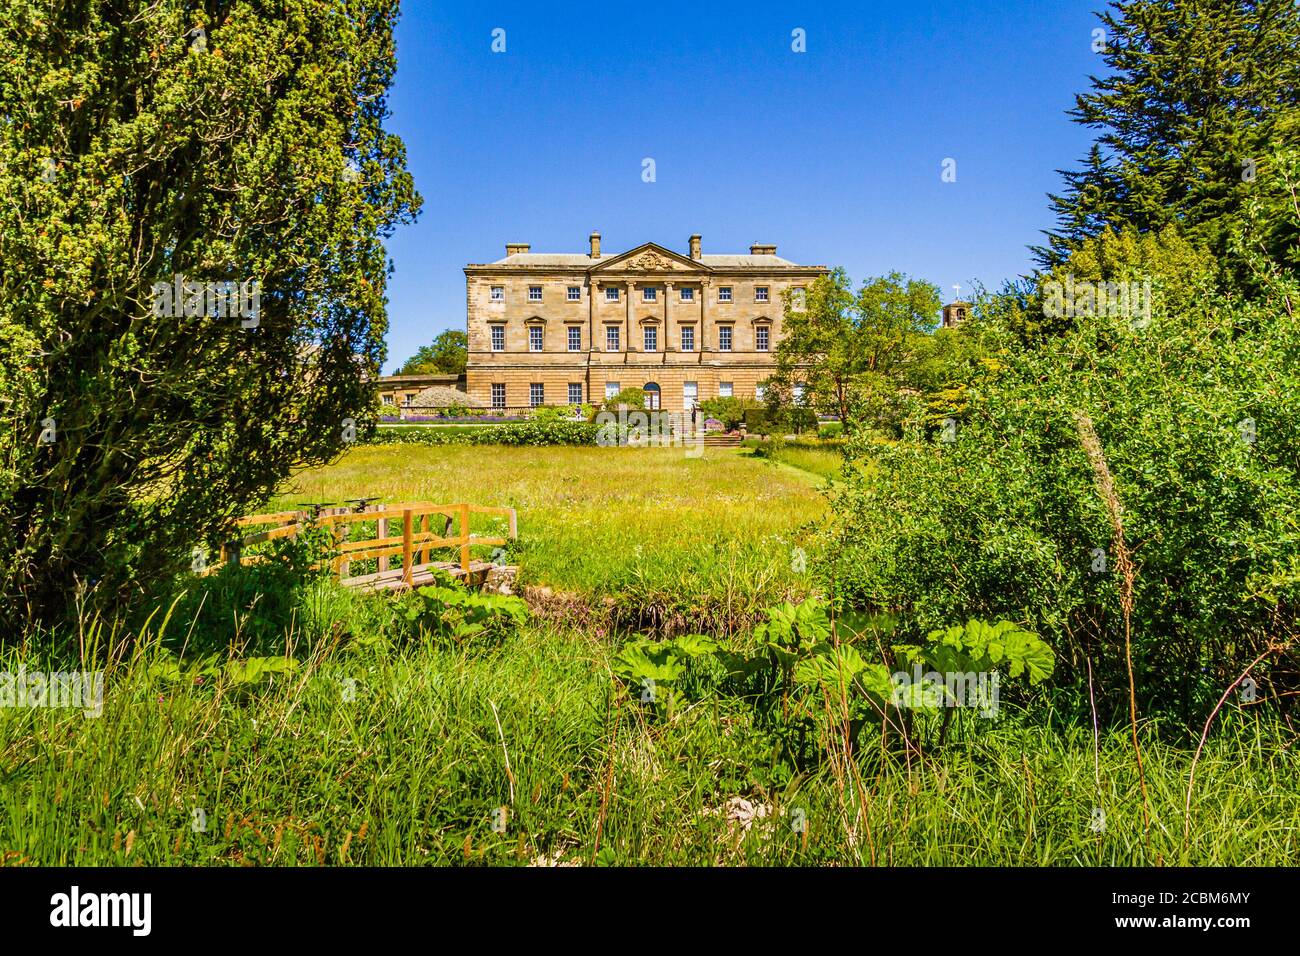 Howick Hall, Howick, Northumberland, Royaume-Uni Banque D'Images